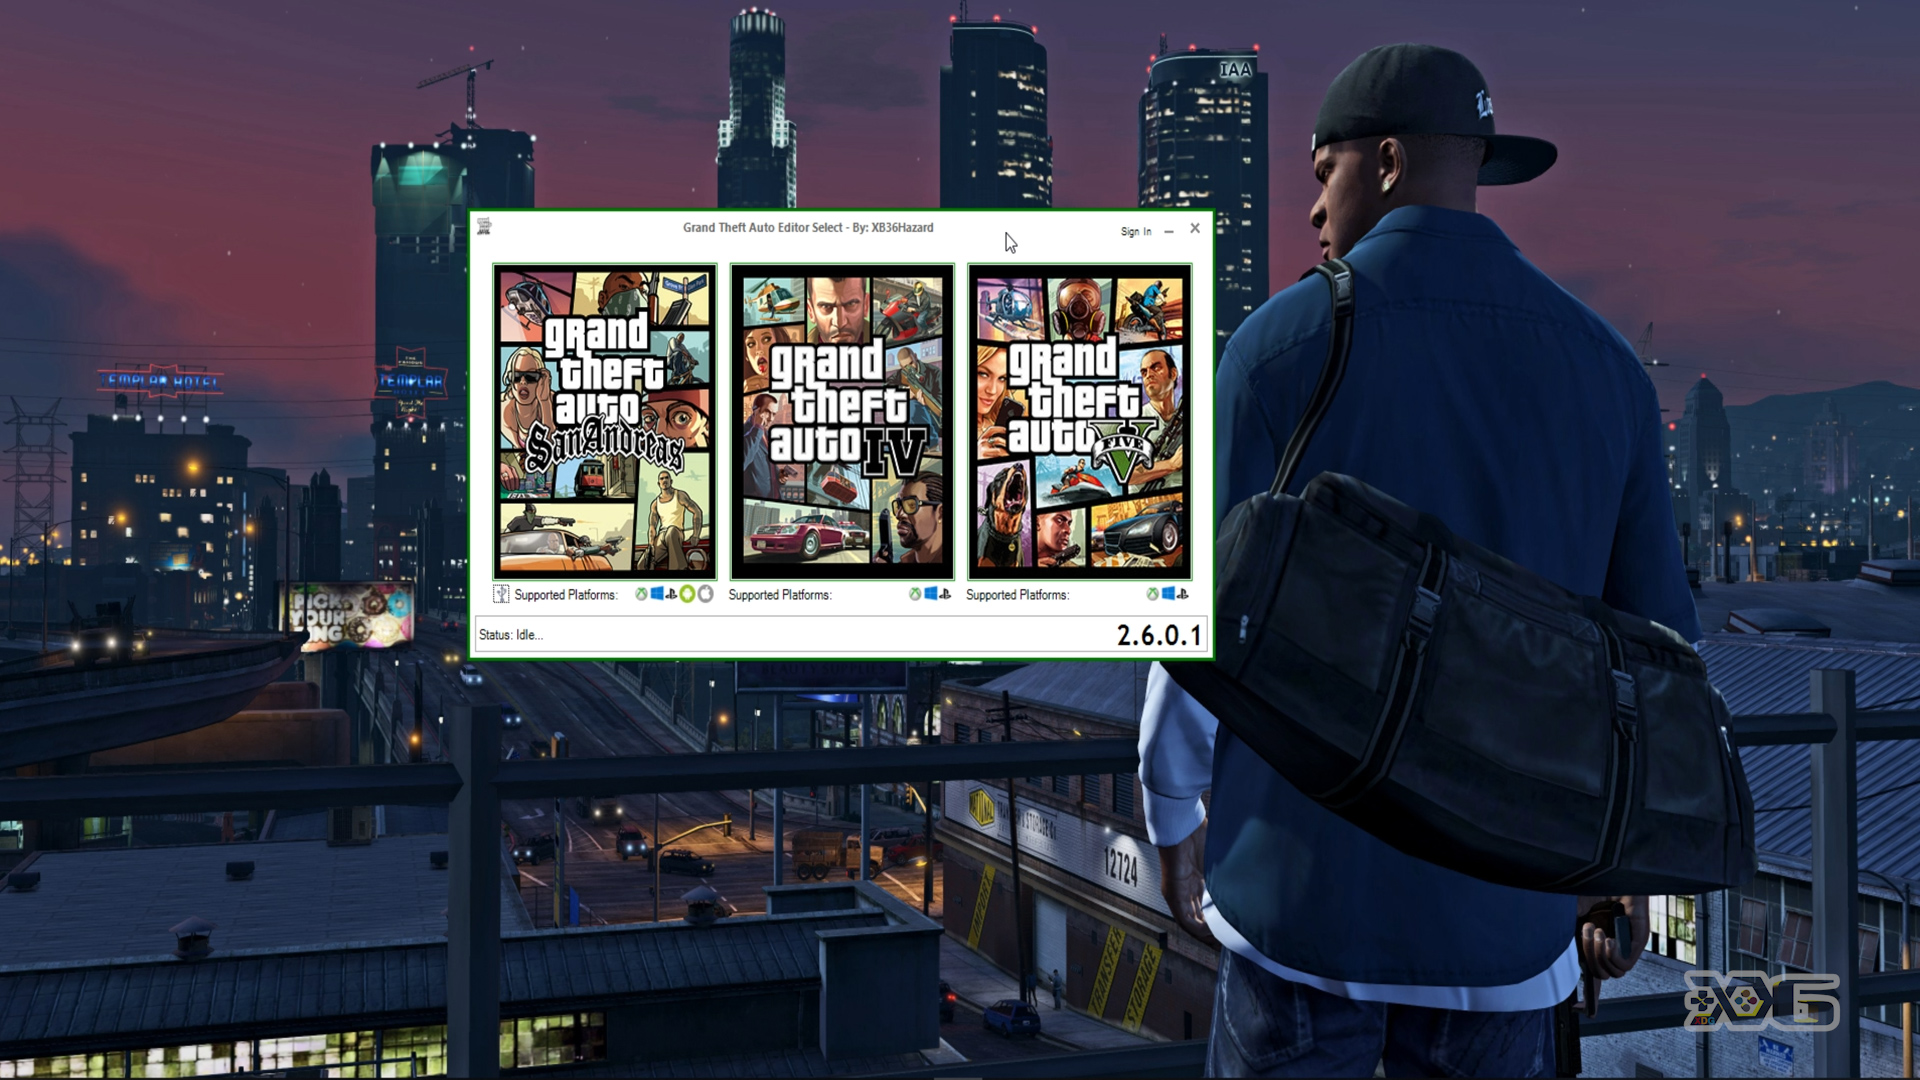 Grand Theft Auto V Save Editor by XB36Hazard for GTA 5